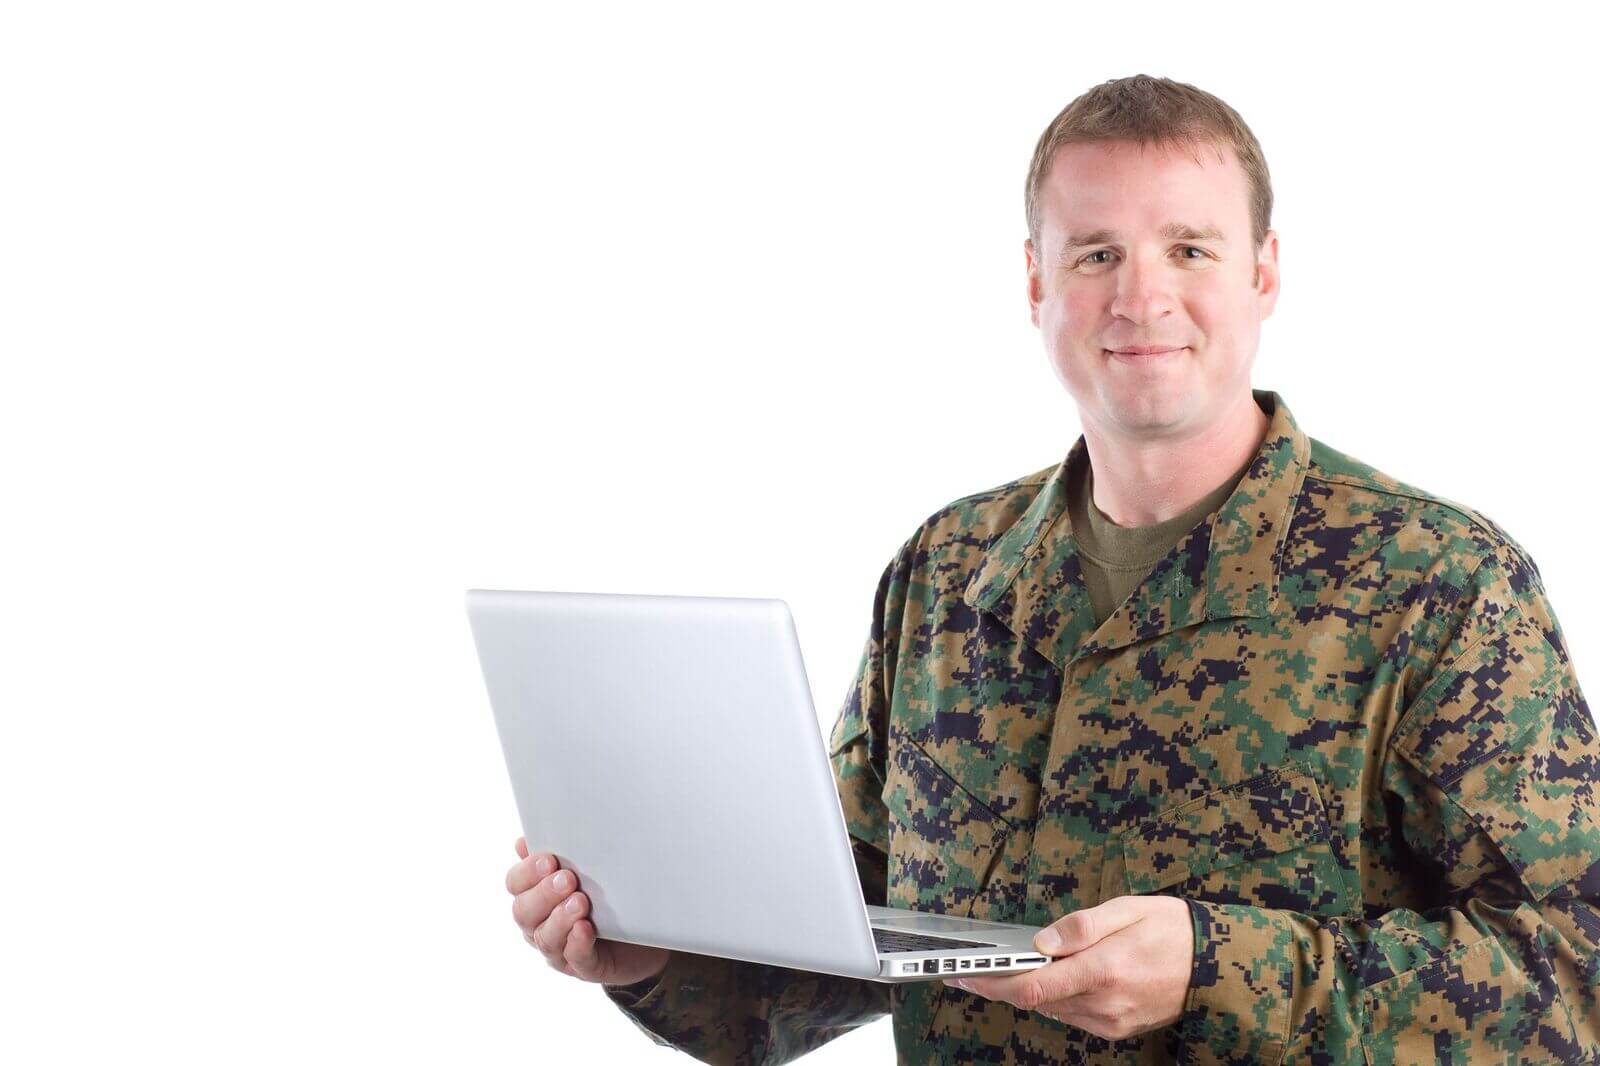 Learn how to fit education into your busy military schedule.